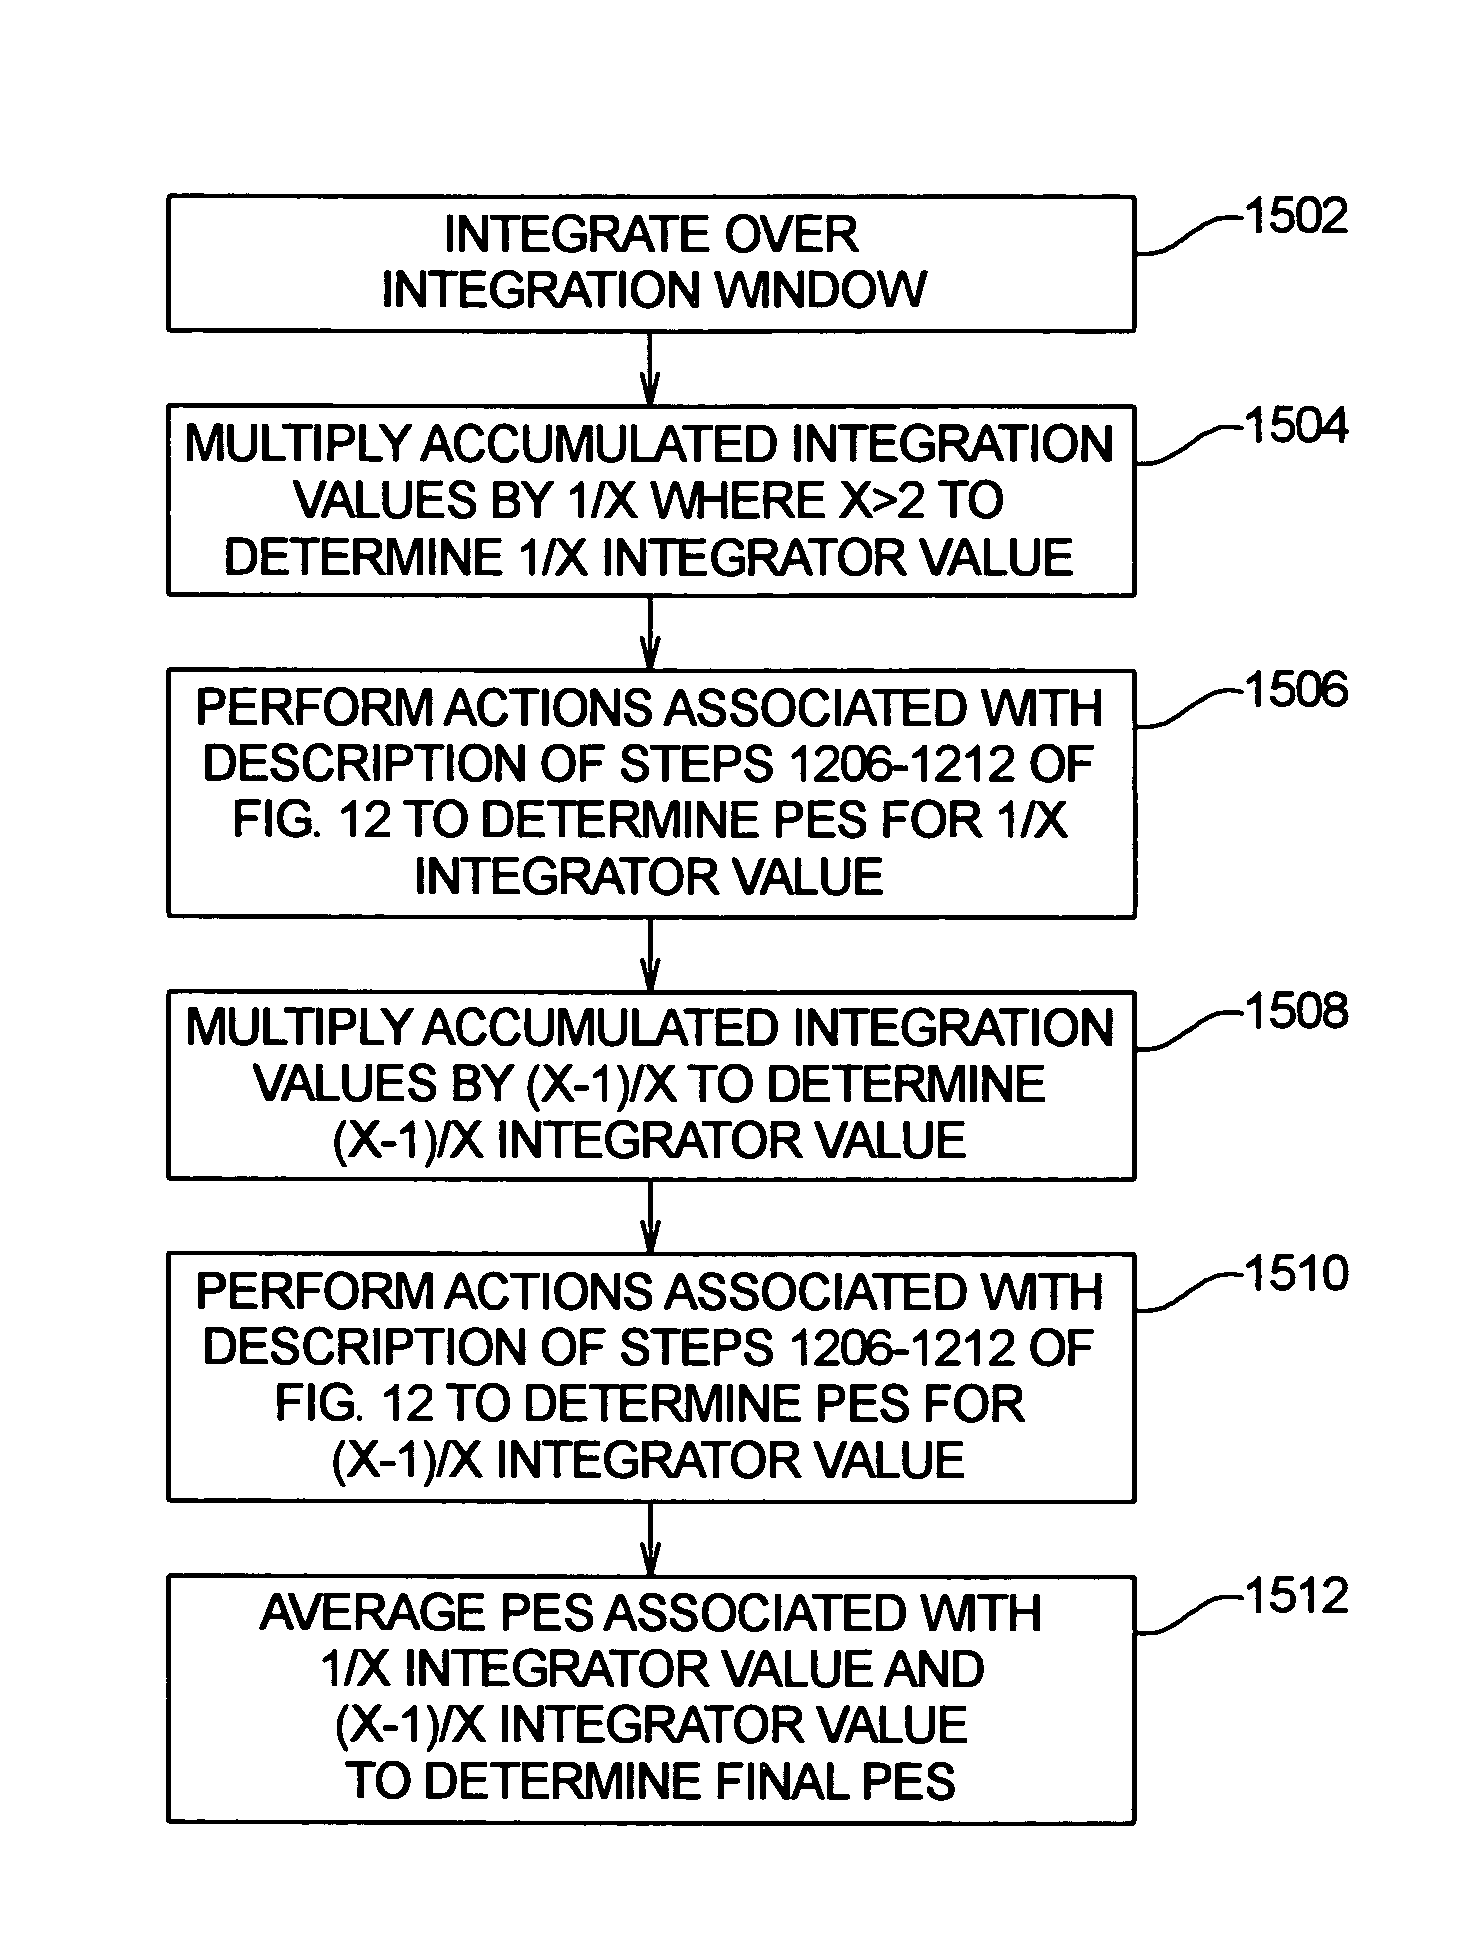 Method and apparatus for providing multi-point position demodulation of a read head when using spiral-written servo information